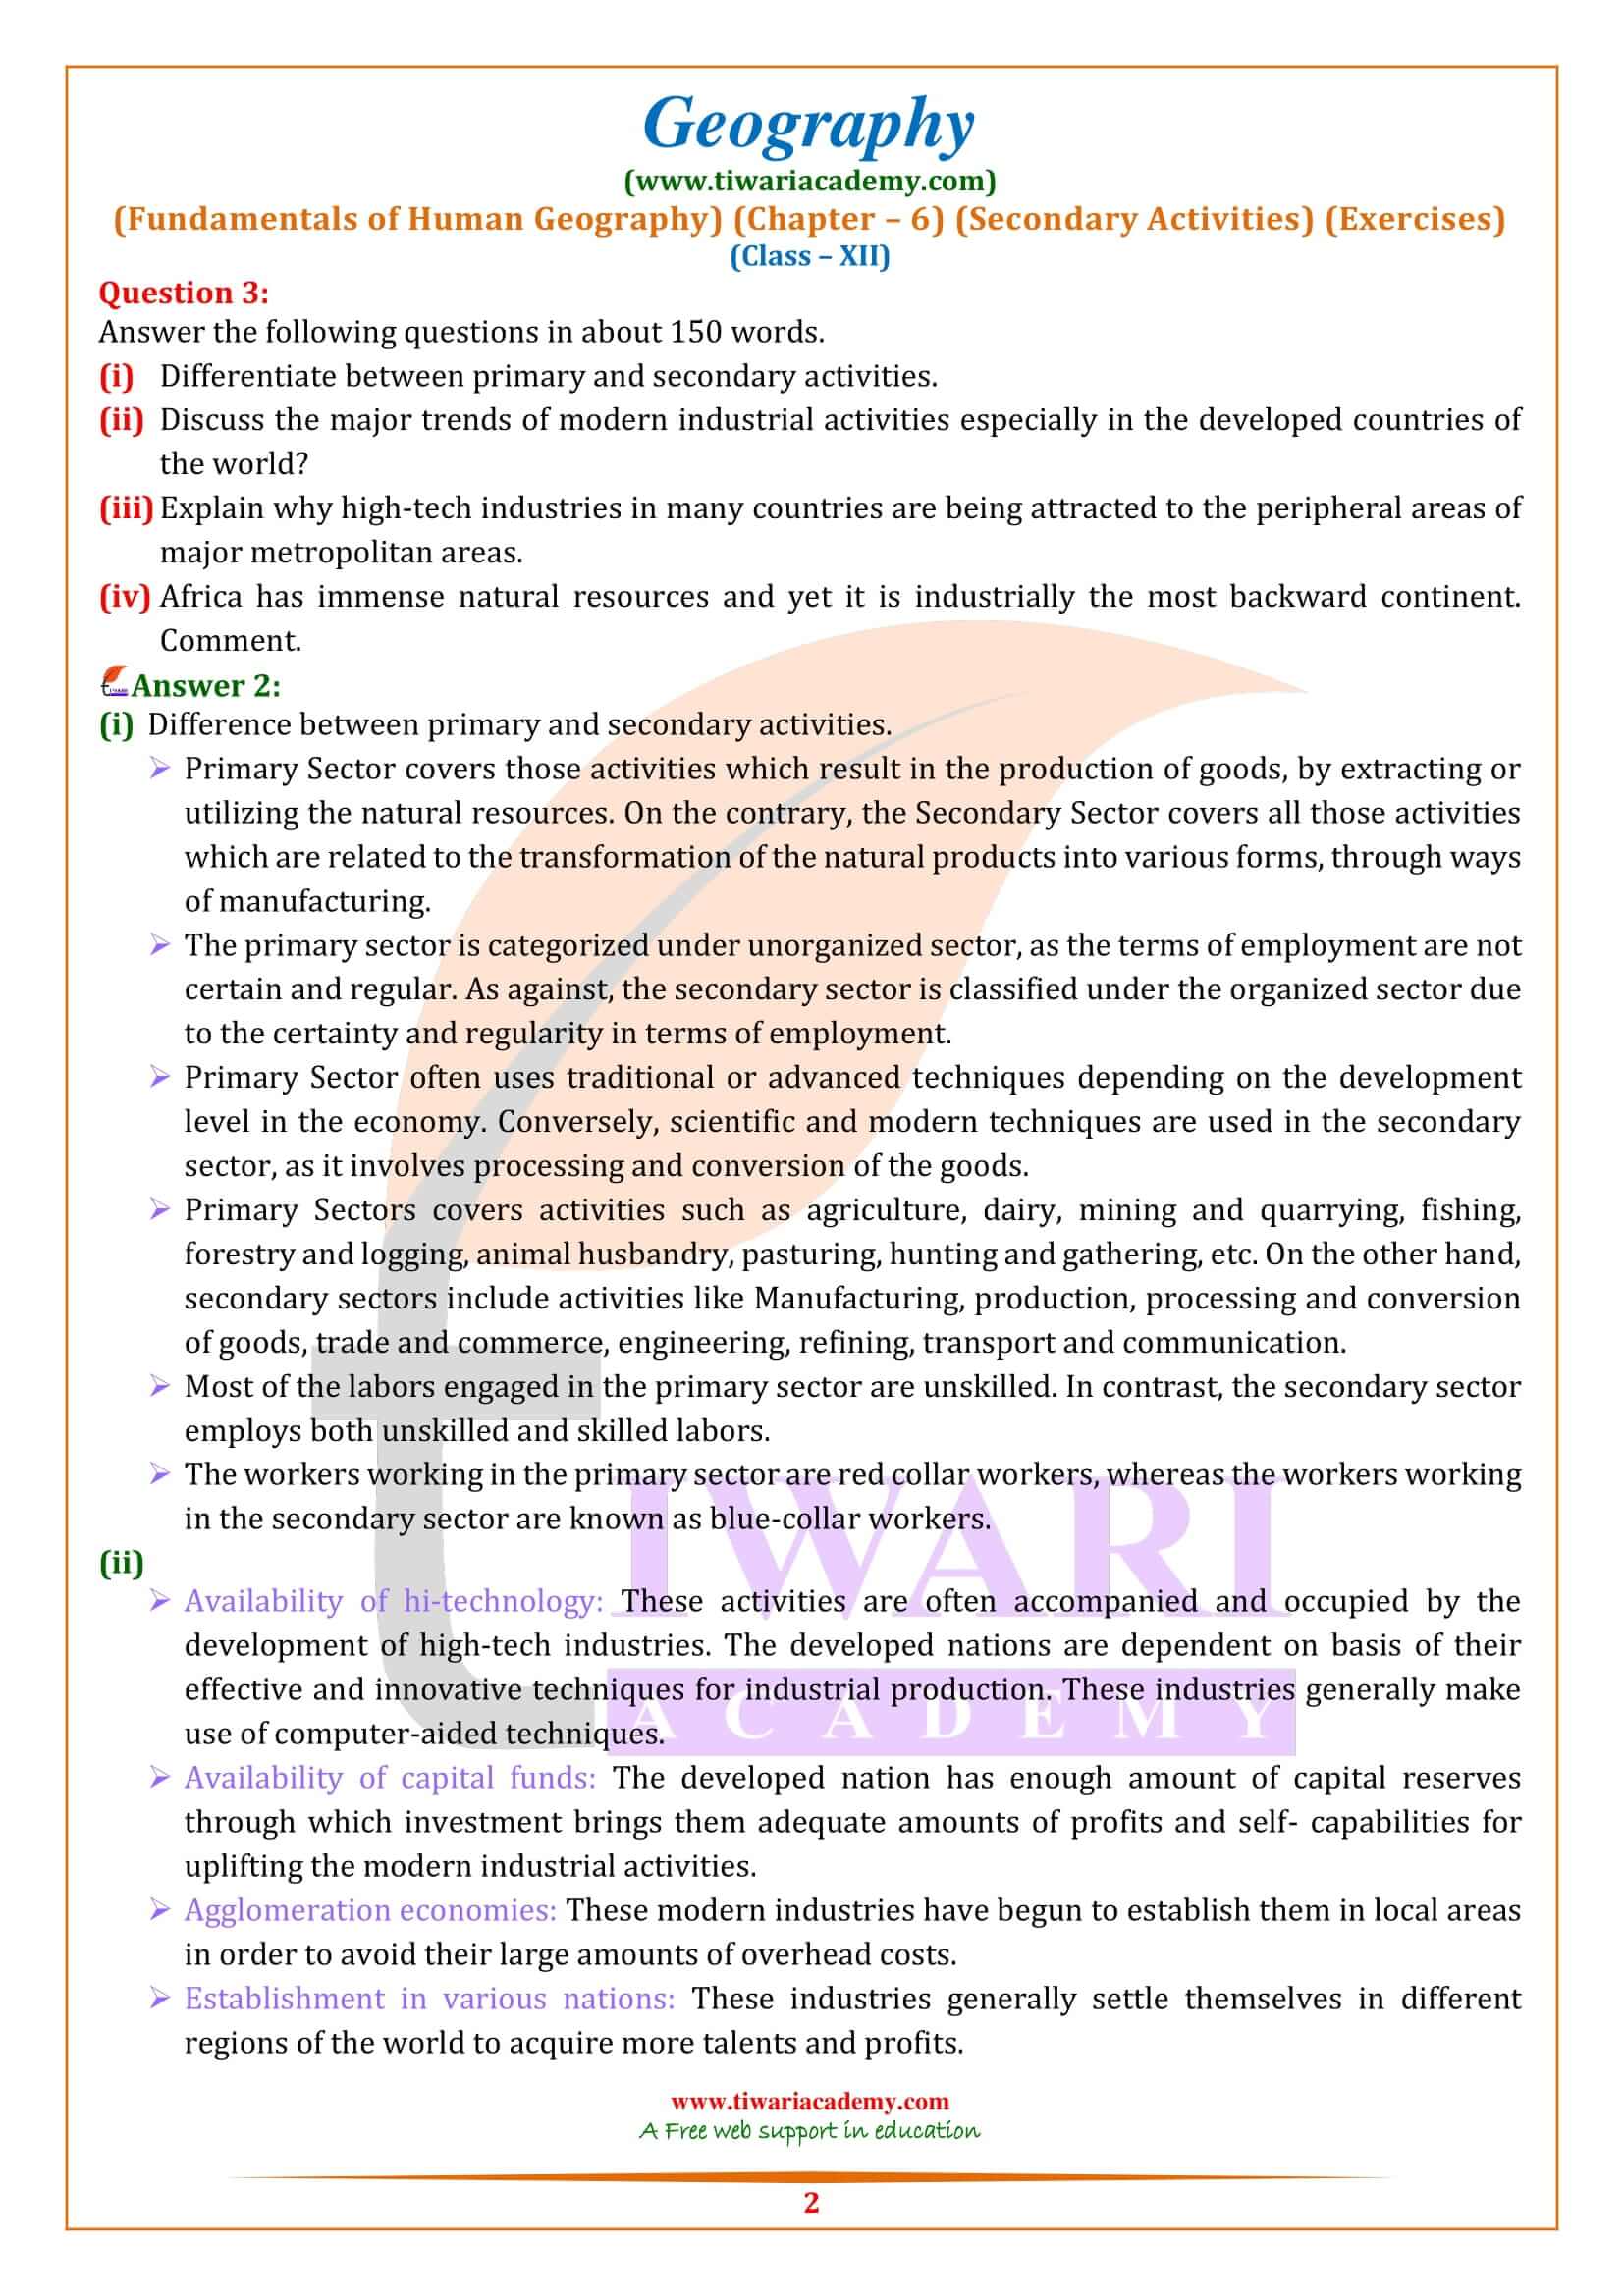 NCERT Solutions for Class 12 Geography Chapter 6